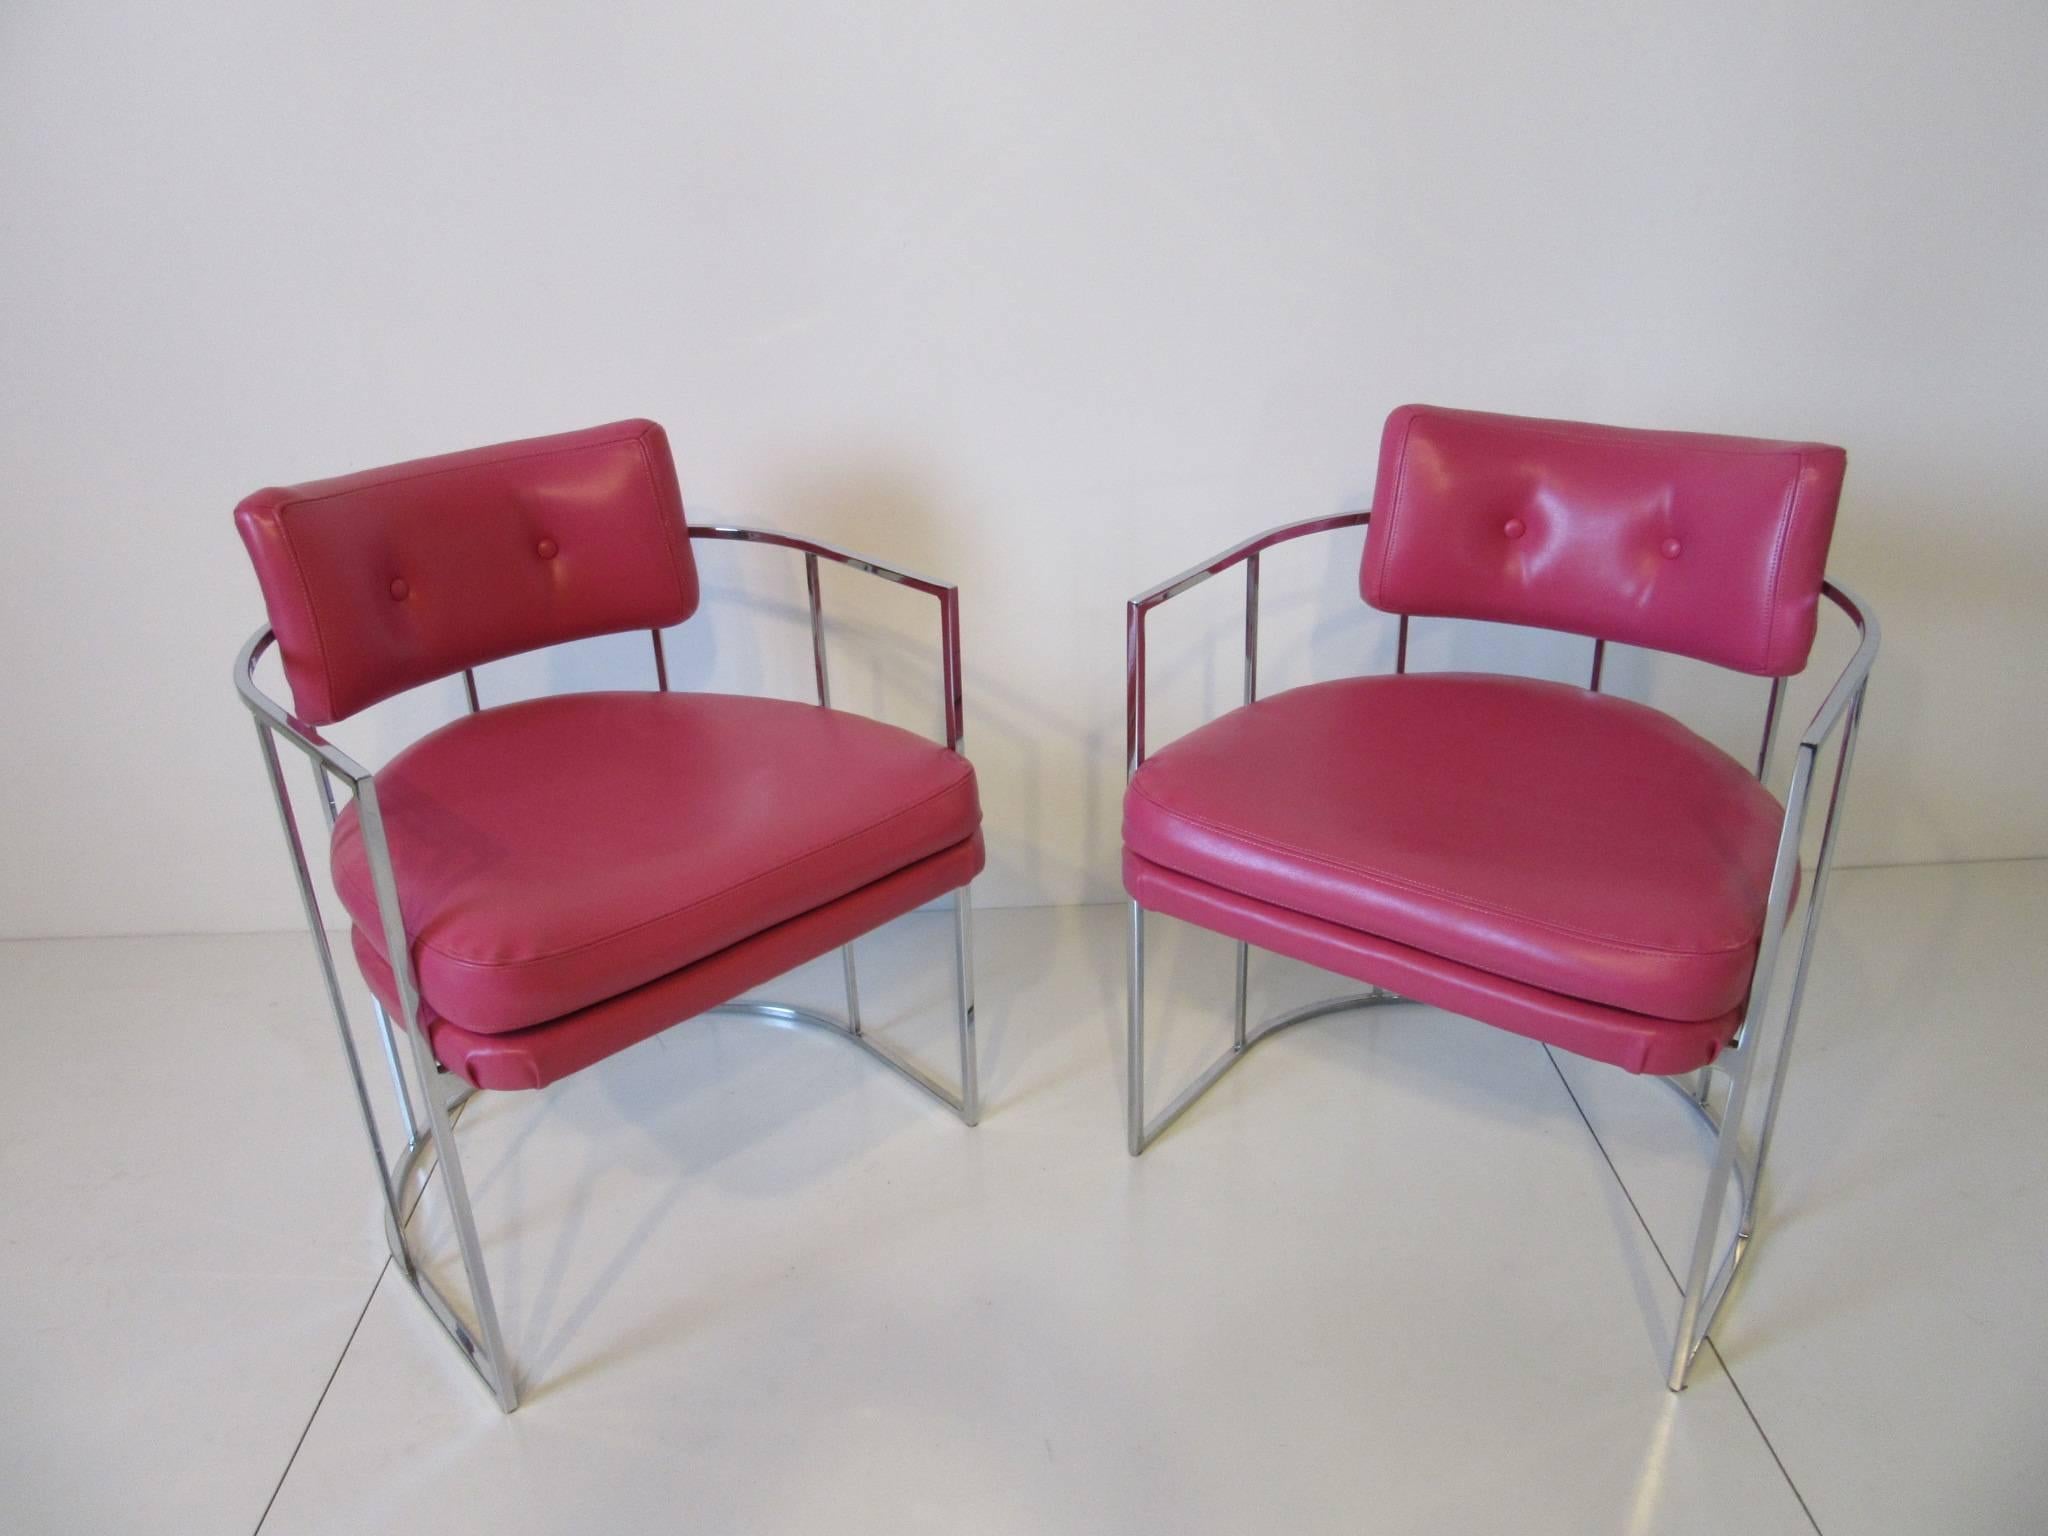 20th Century Milo Baughman Chrome and Upholstered Chairs